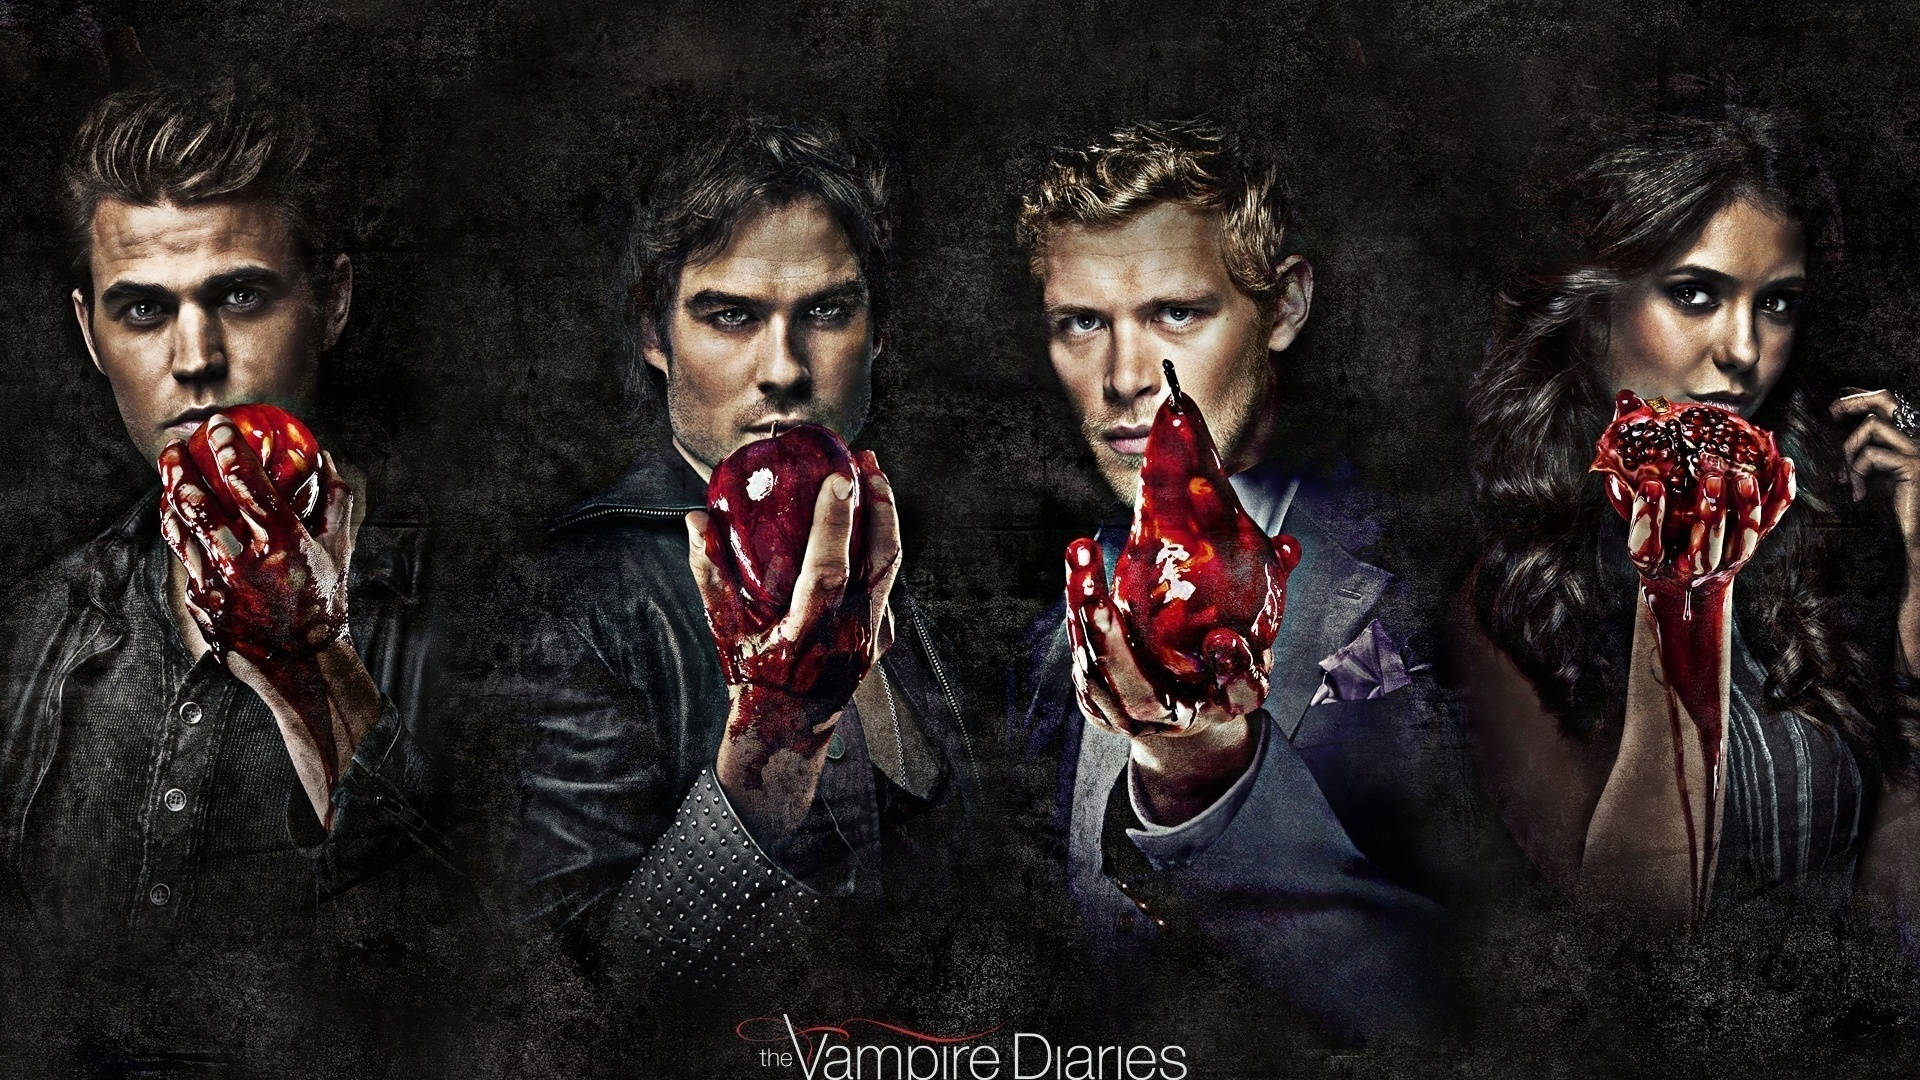 The Vampire Diaries Characters Holding Bloody Fruits